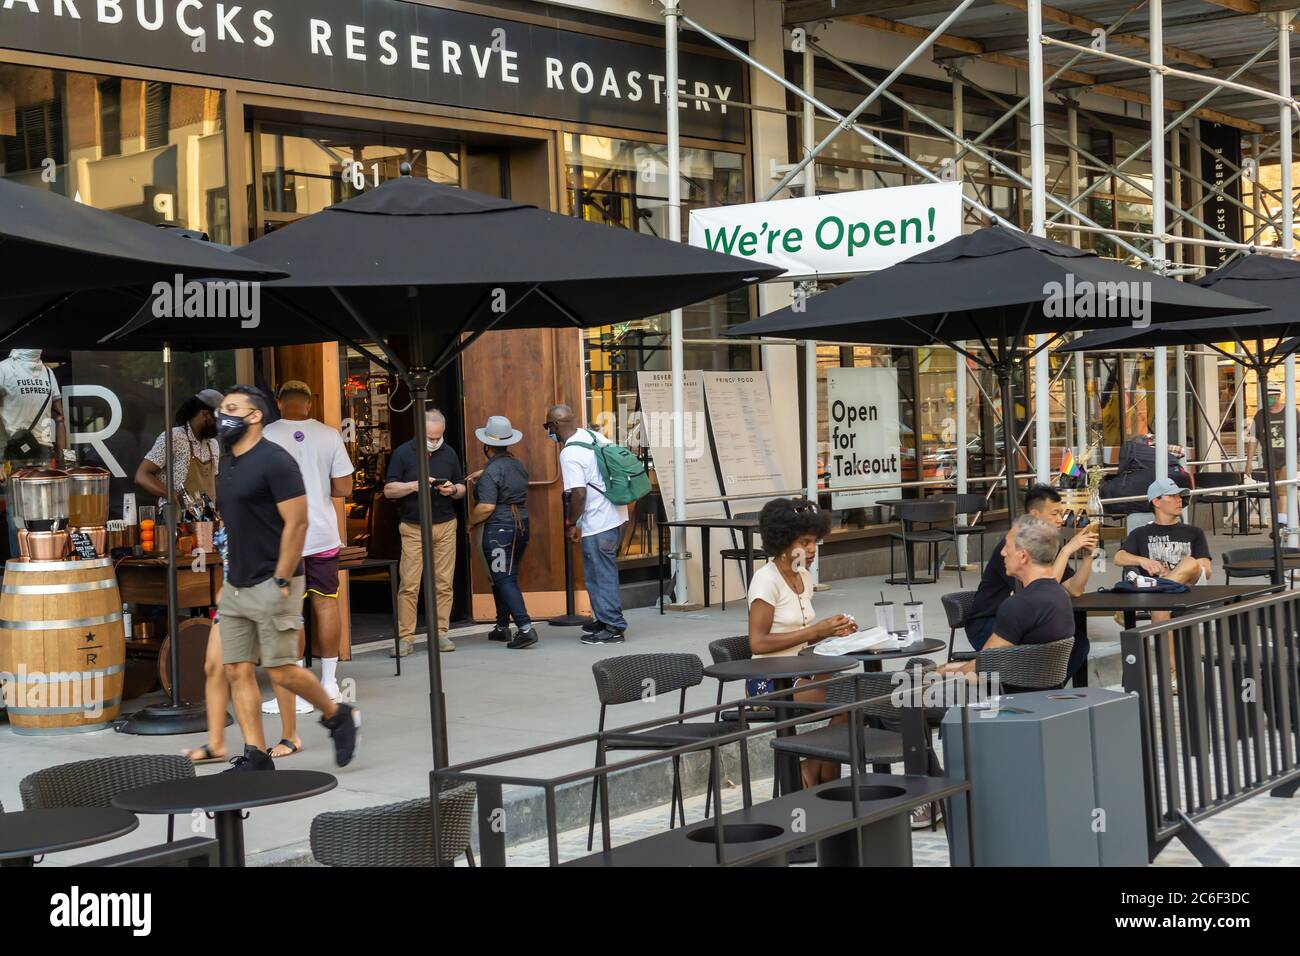 https://c8.alamy.com/comp/2C6F3DC/outdoor-seating-at-the-starbucks-reserve-roastery-in-the-meatpacking-district-in-new-york-on-thursday-july-2-2020-while-al-fresco-dining-is-now-allowed-indoor-dining-as-part-of-the-phase-3-reopening-in-new-york-city-has-been-postponed-due-to-coronavirus-non-compliance-concerns-richard-b-levine-2C6F3DC.jpg